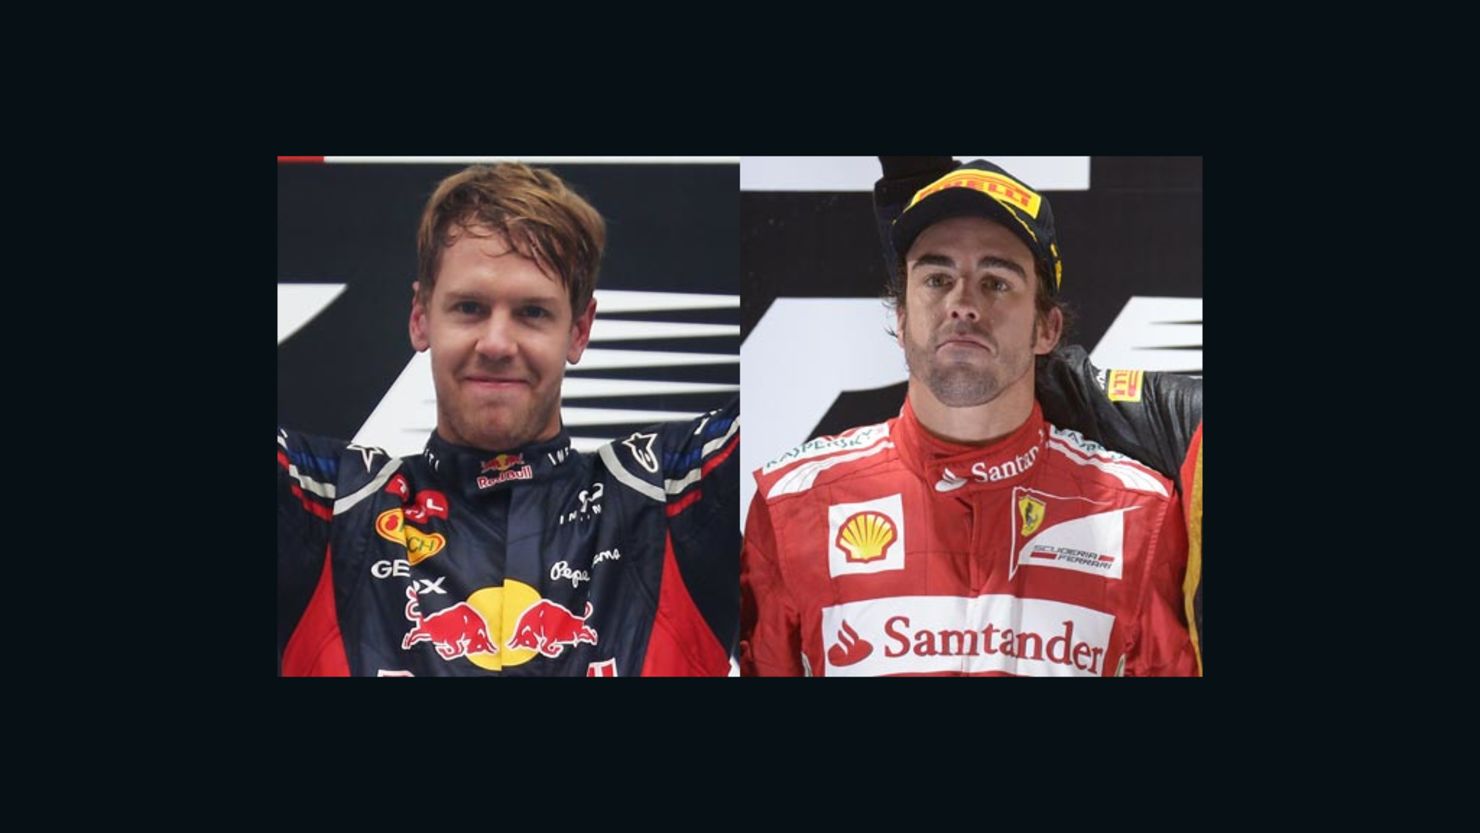 Sebasttian Vettel won his third successive world title on Sunday, denying championship rival Fernando Alonso by three points.